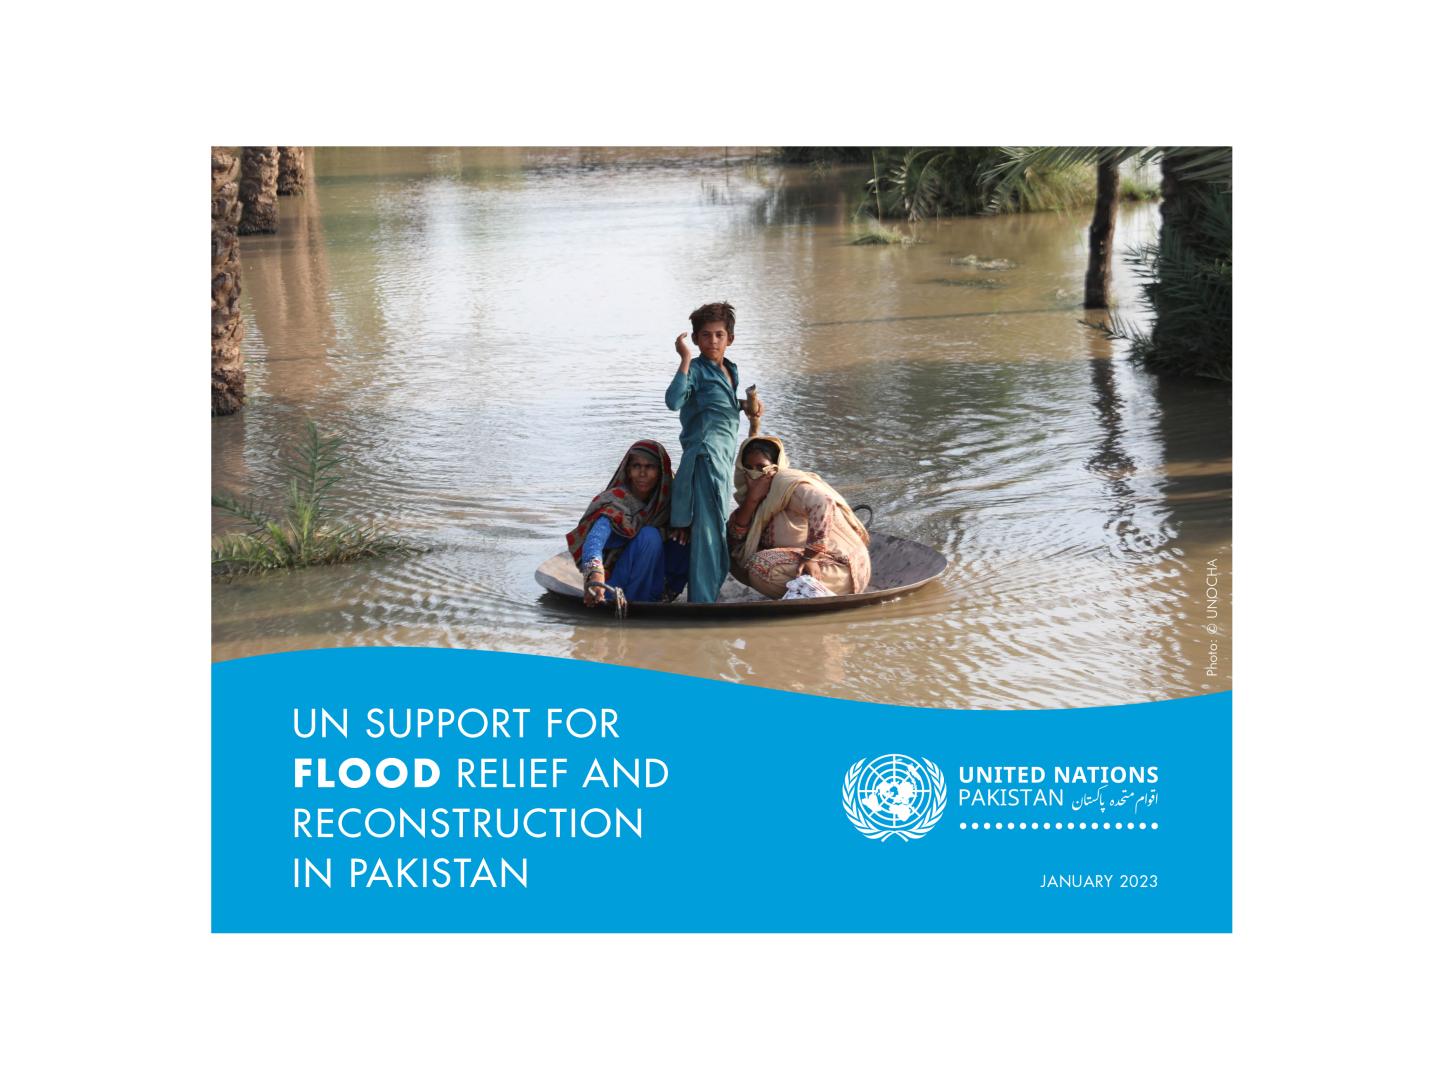 UN Support for Flood Relief in Pakistan